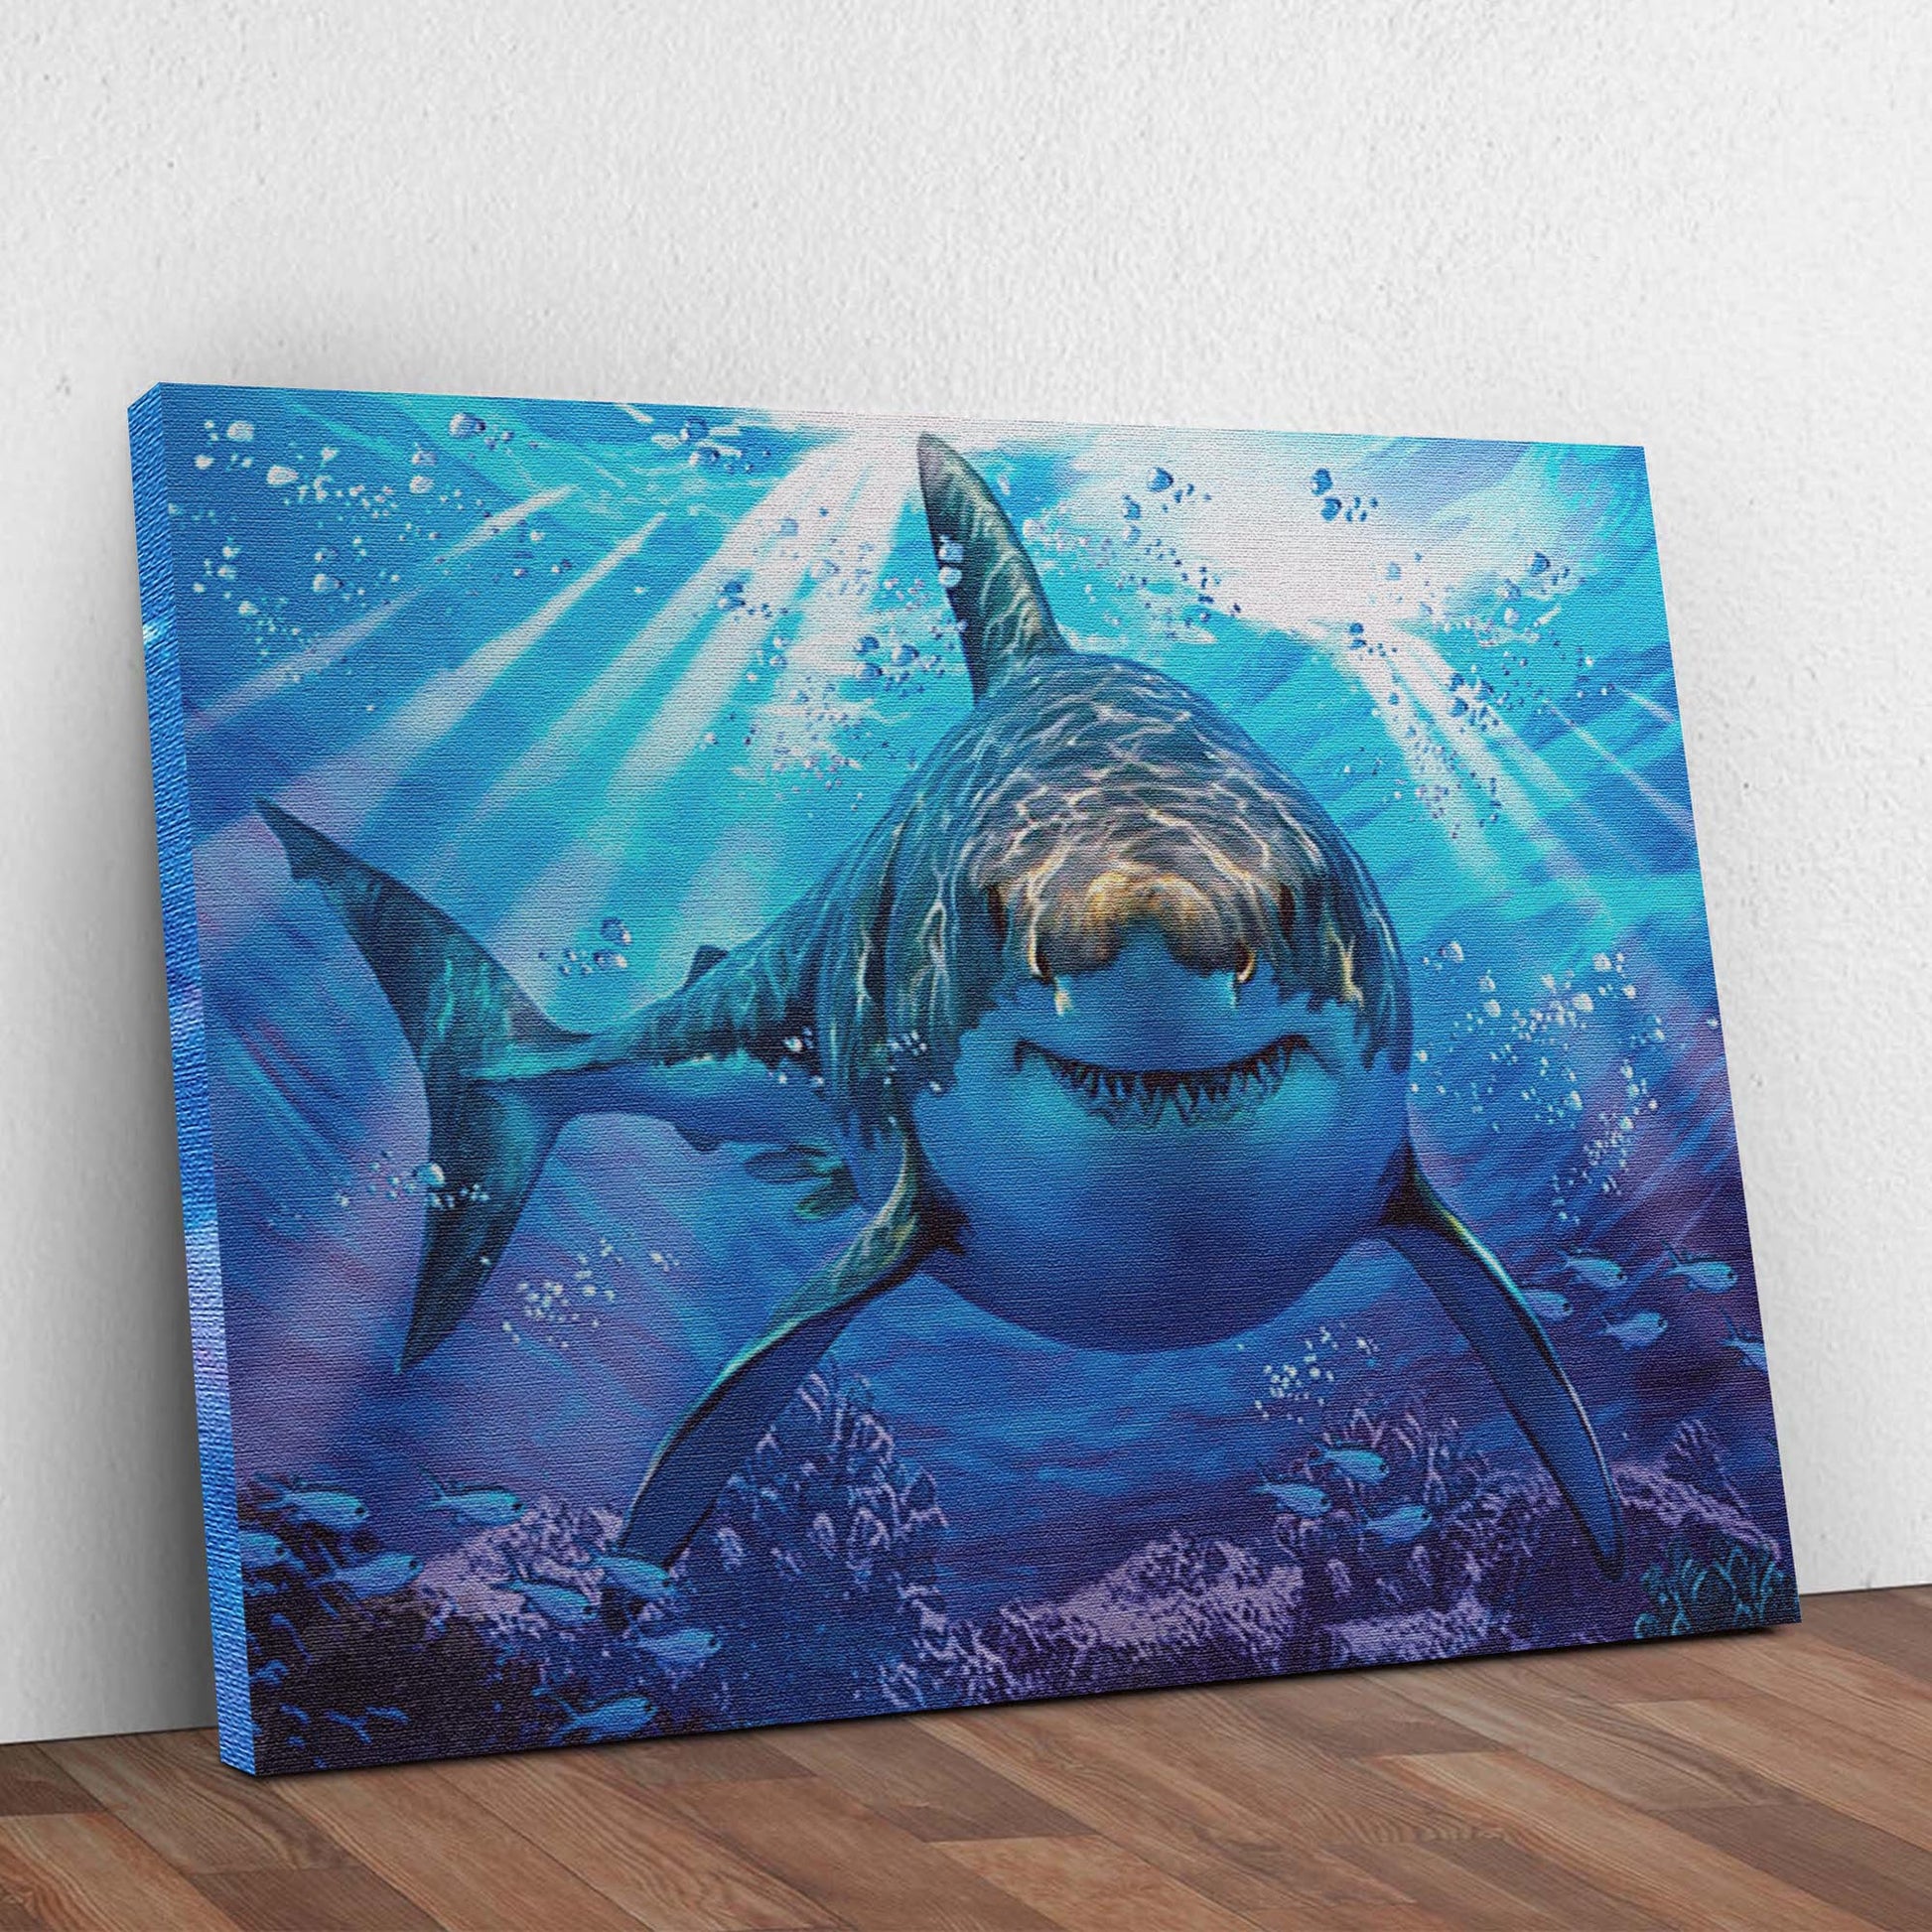 Underwater White Shark Canvas Wall Art Style 2 - Image by Tailored Canvases